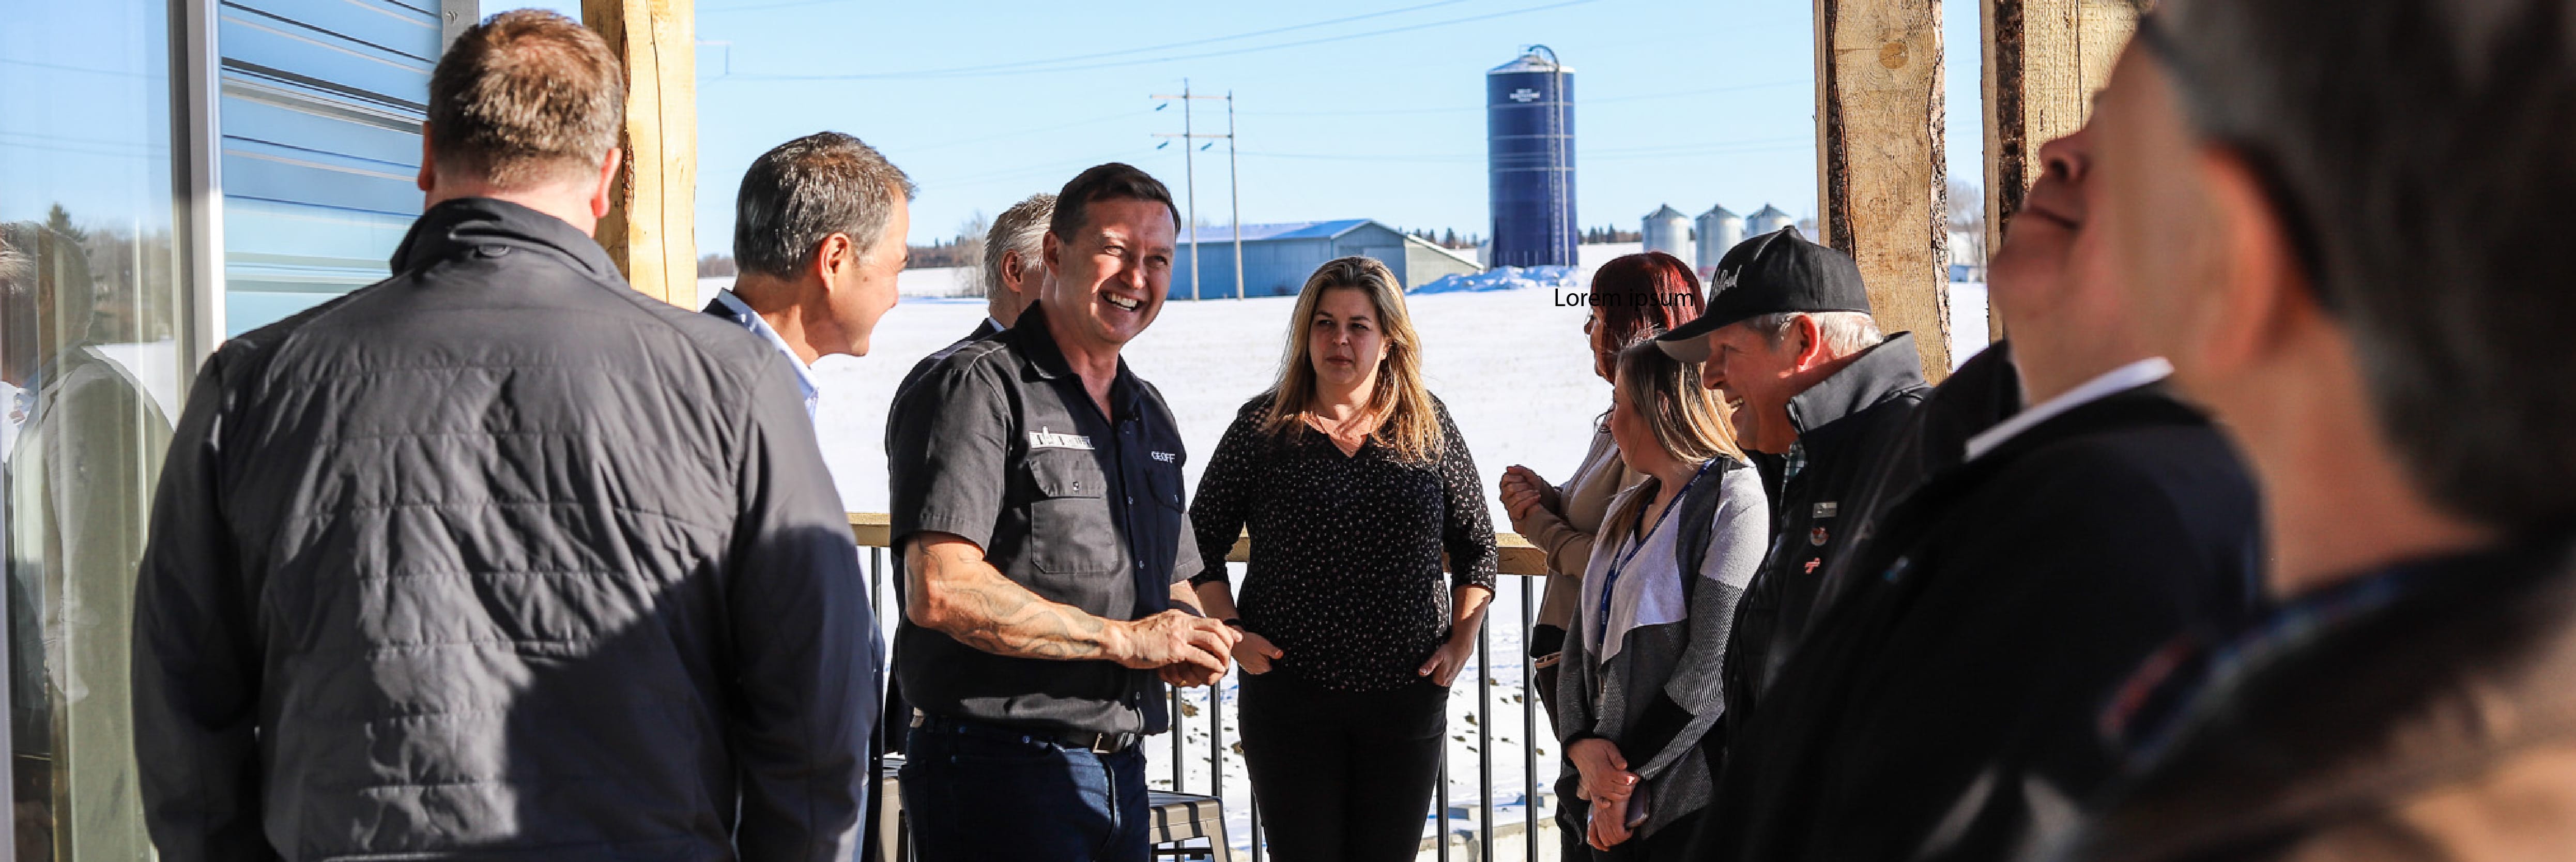 Group of community members gather around business owner on an outdoor deck. The business owner smiles amid telling a story and the audience is engaged, silos and fields can be seen off the deck.